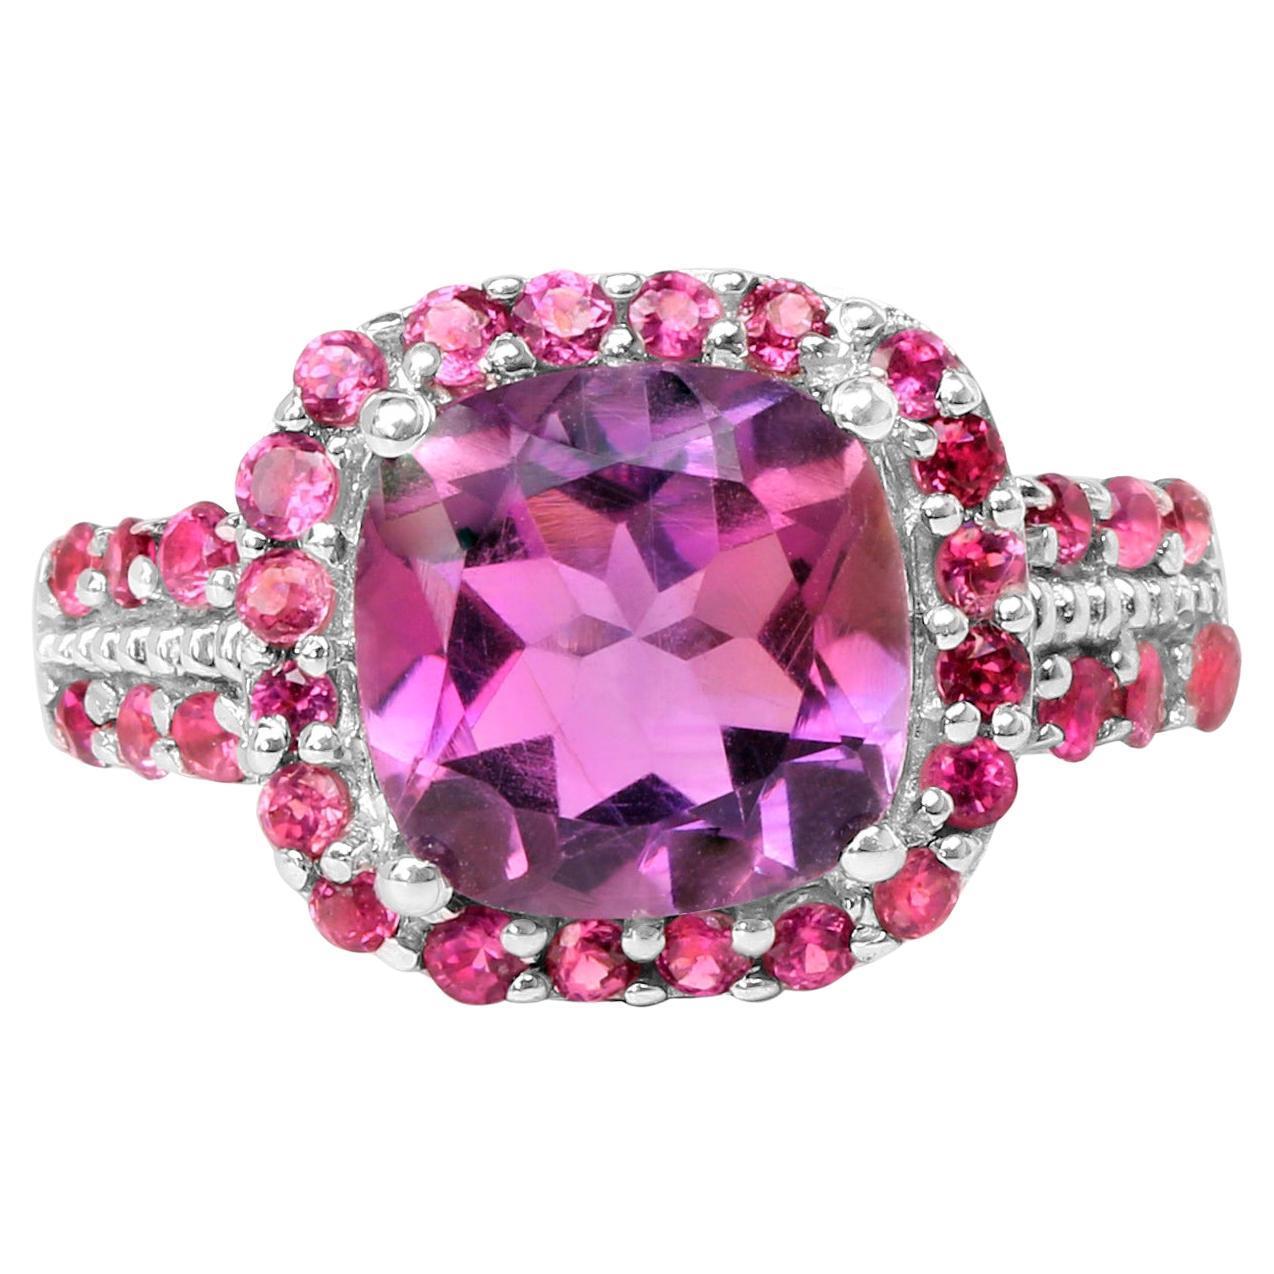 Amethyst Cocktail Ring Rhodolite Setting 5 Carats